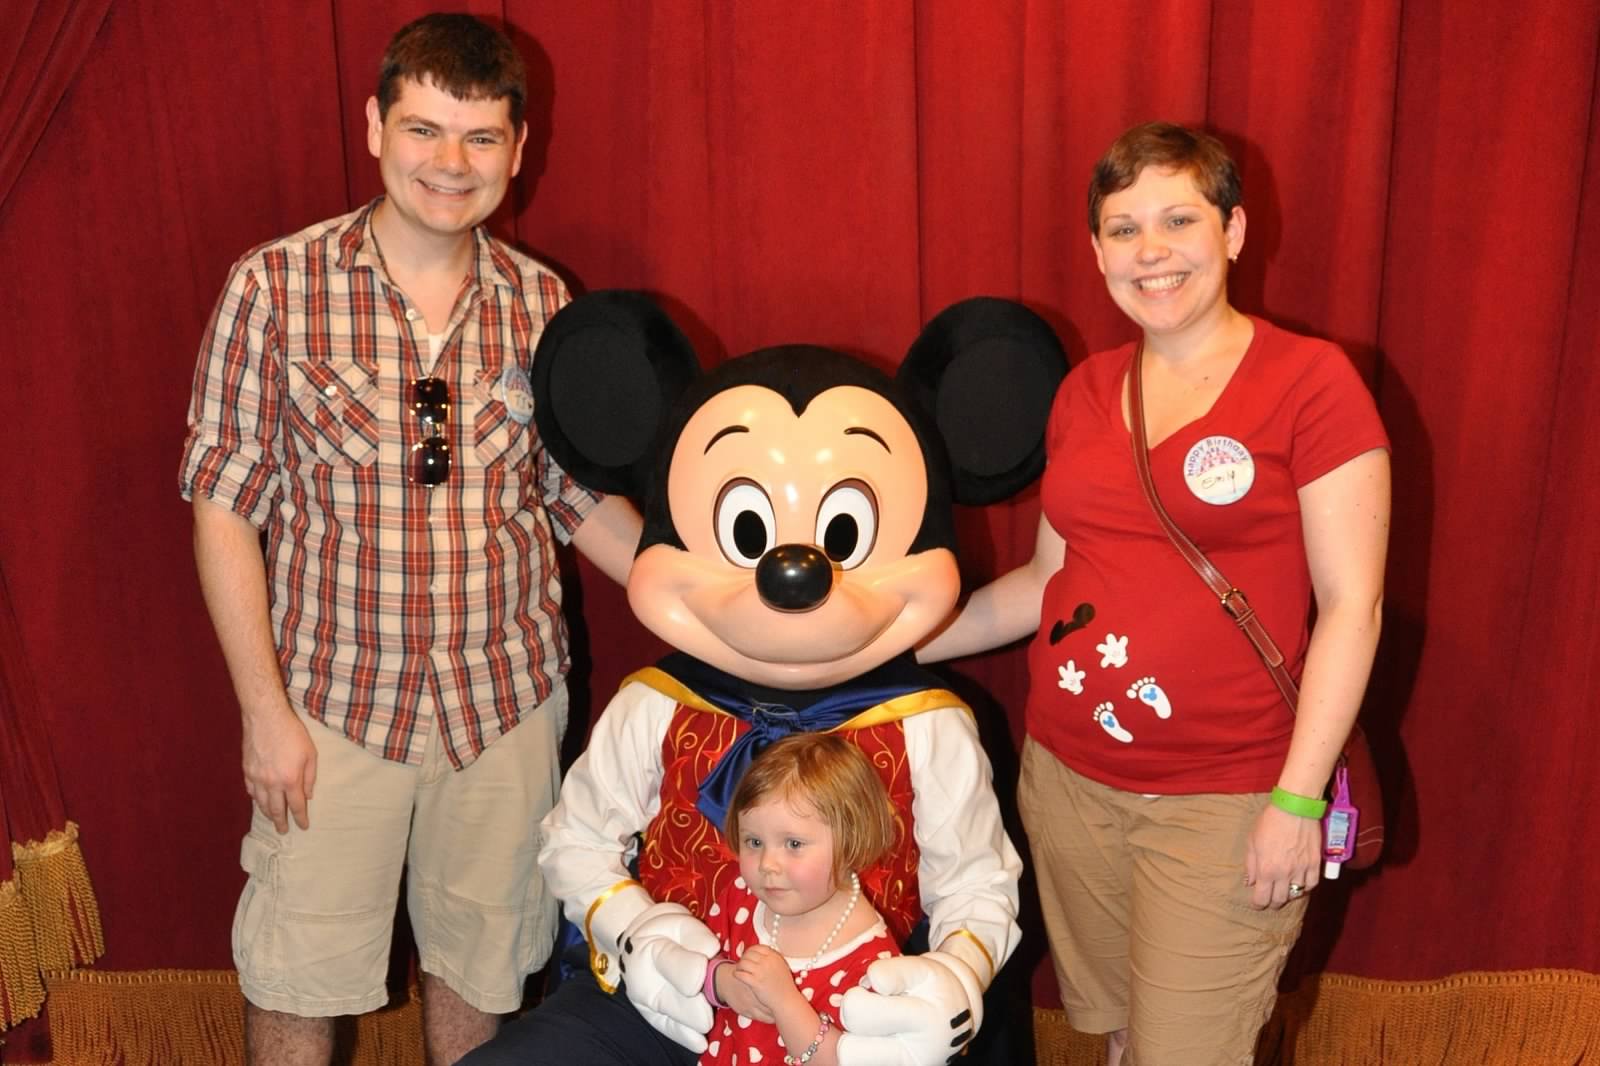 Learn about visiting Walt Disney World while pregnant | PassPorter.com